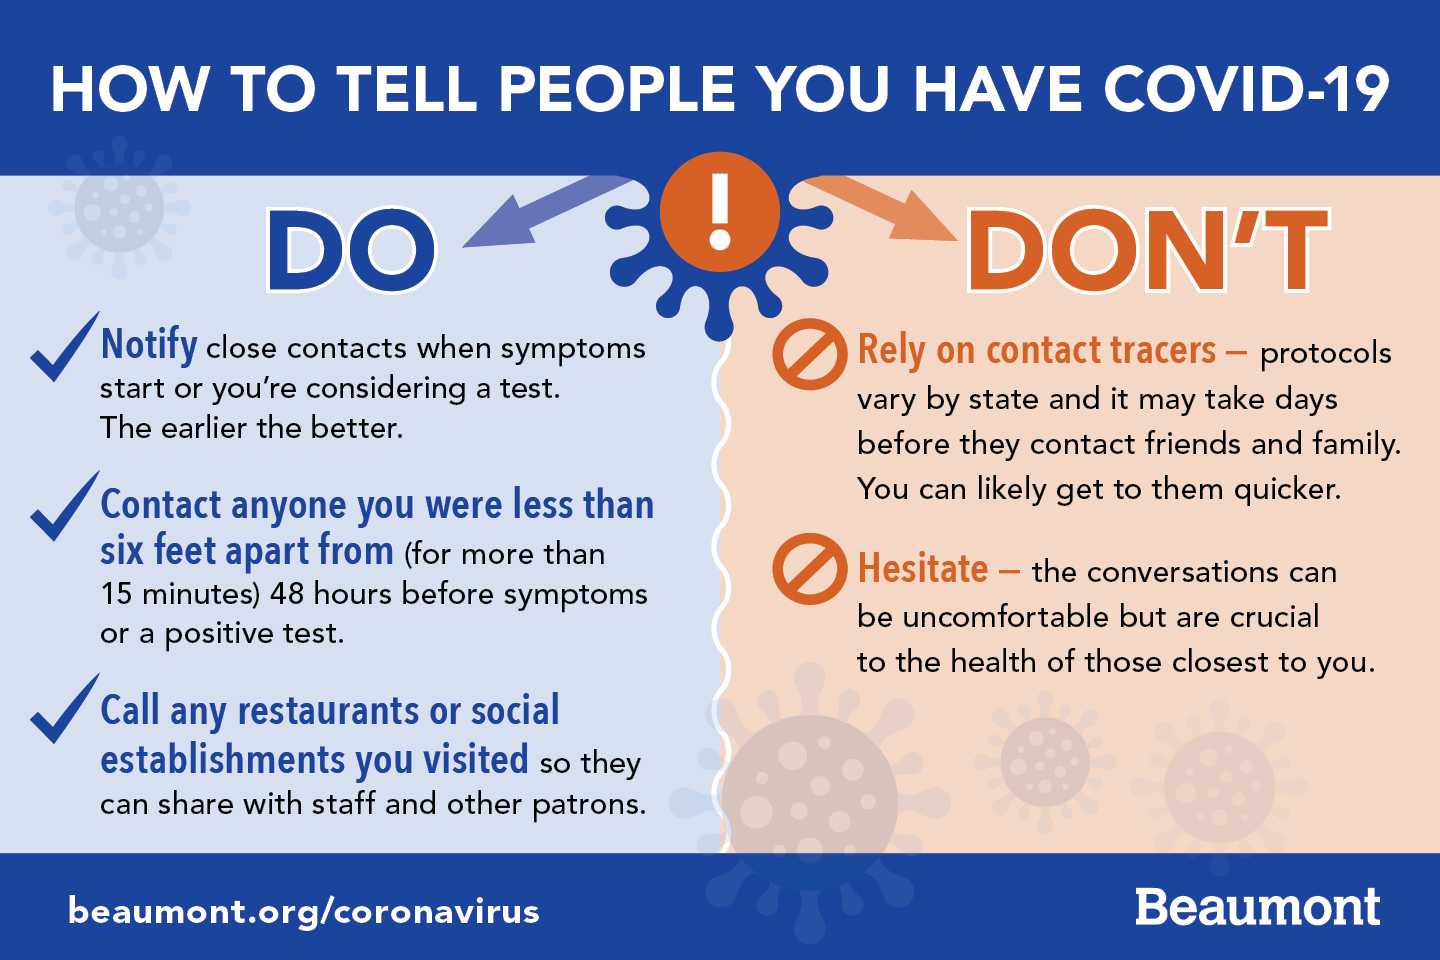 What Should You Do If You Think You Have Coronavirus?